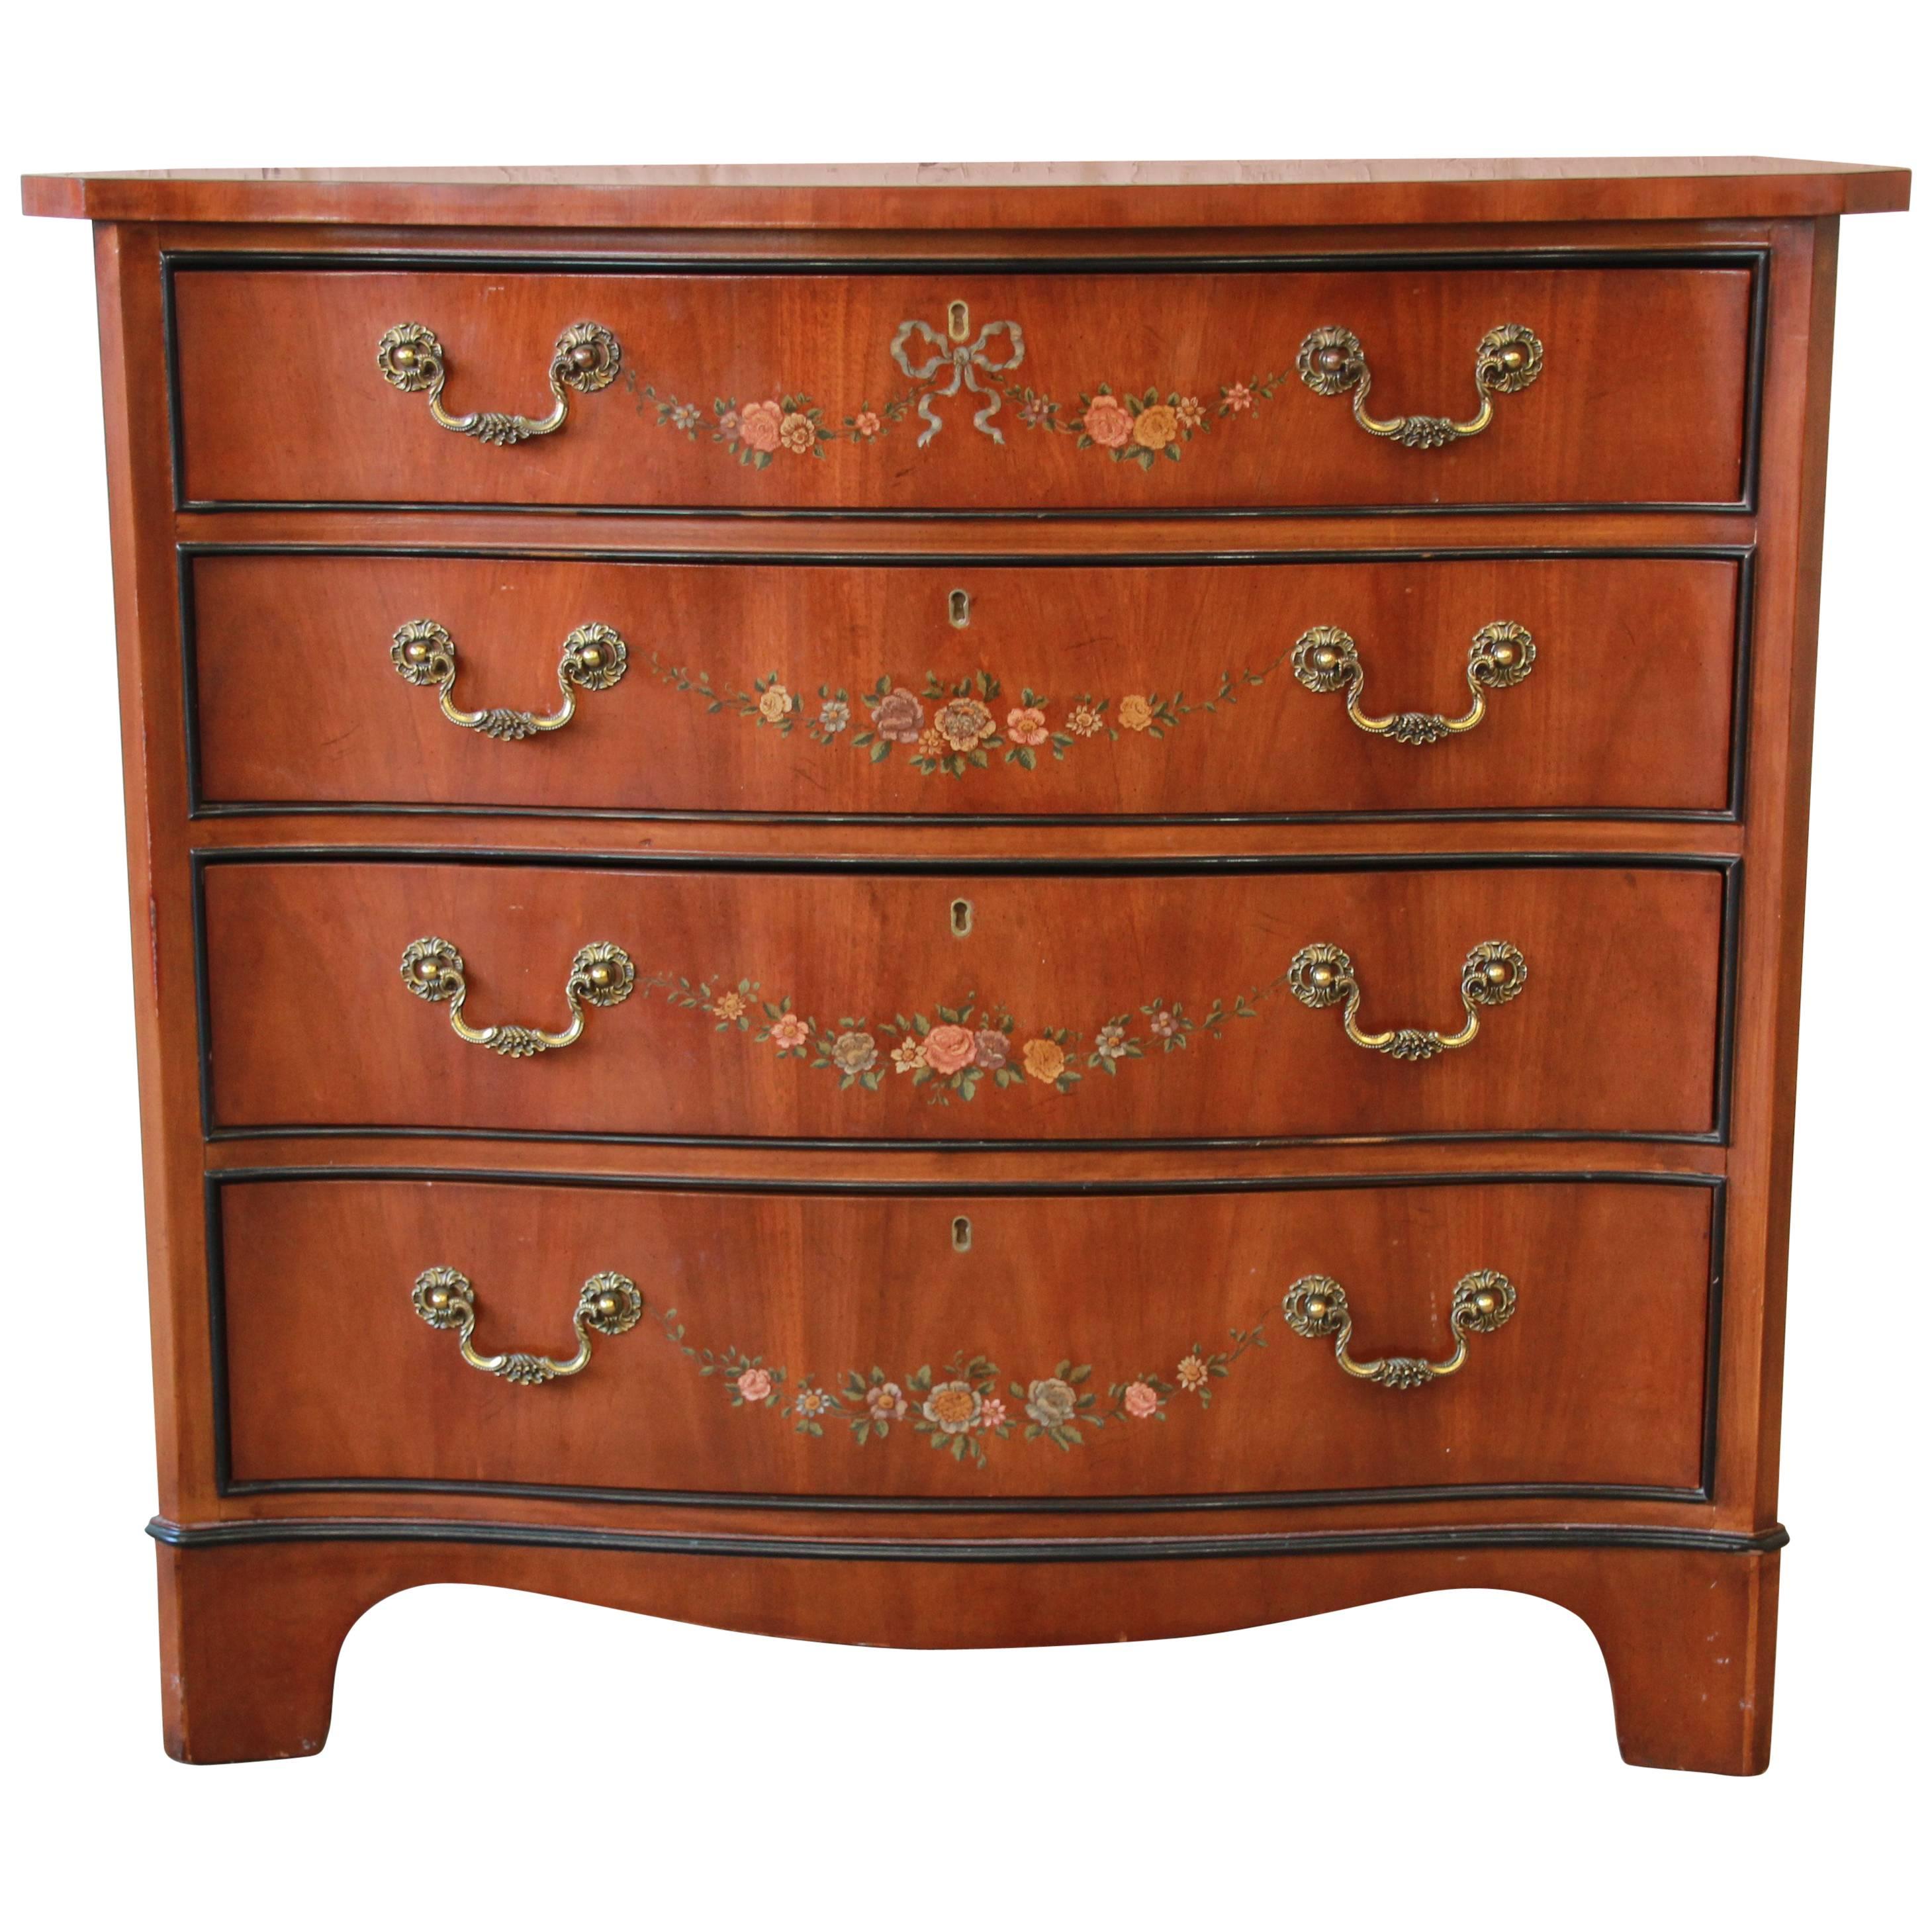 Drexel Heritage Satinwood Hand-Painted Adam Style Chest of Drawers